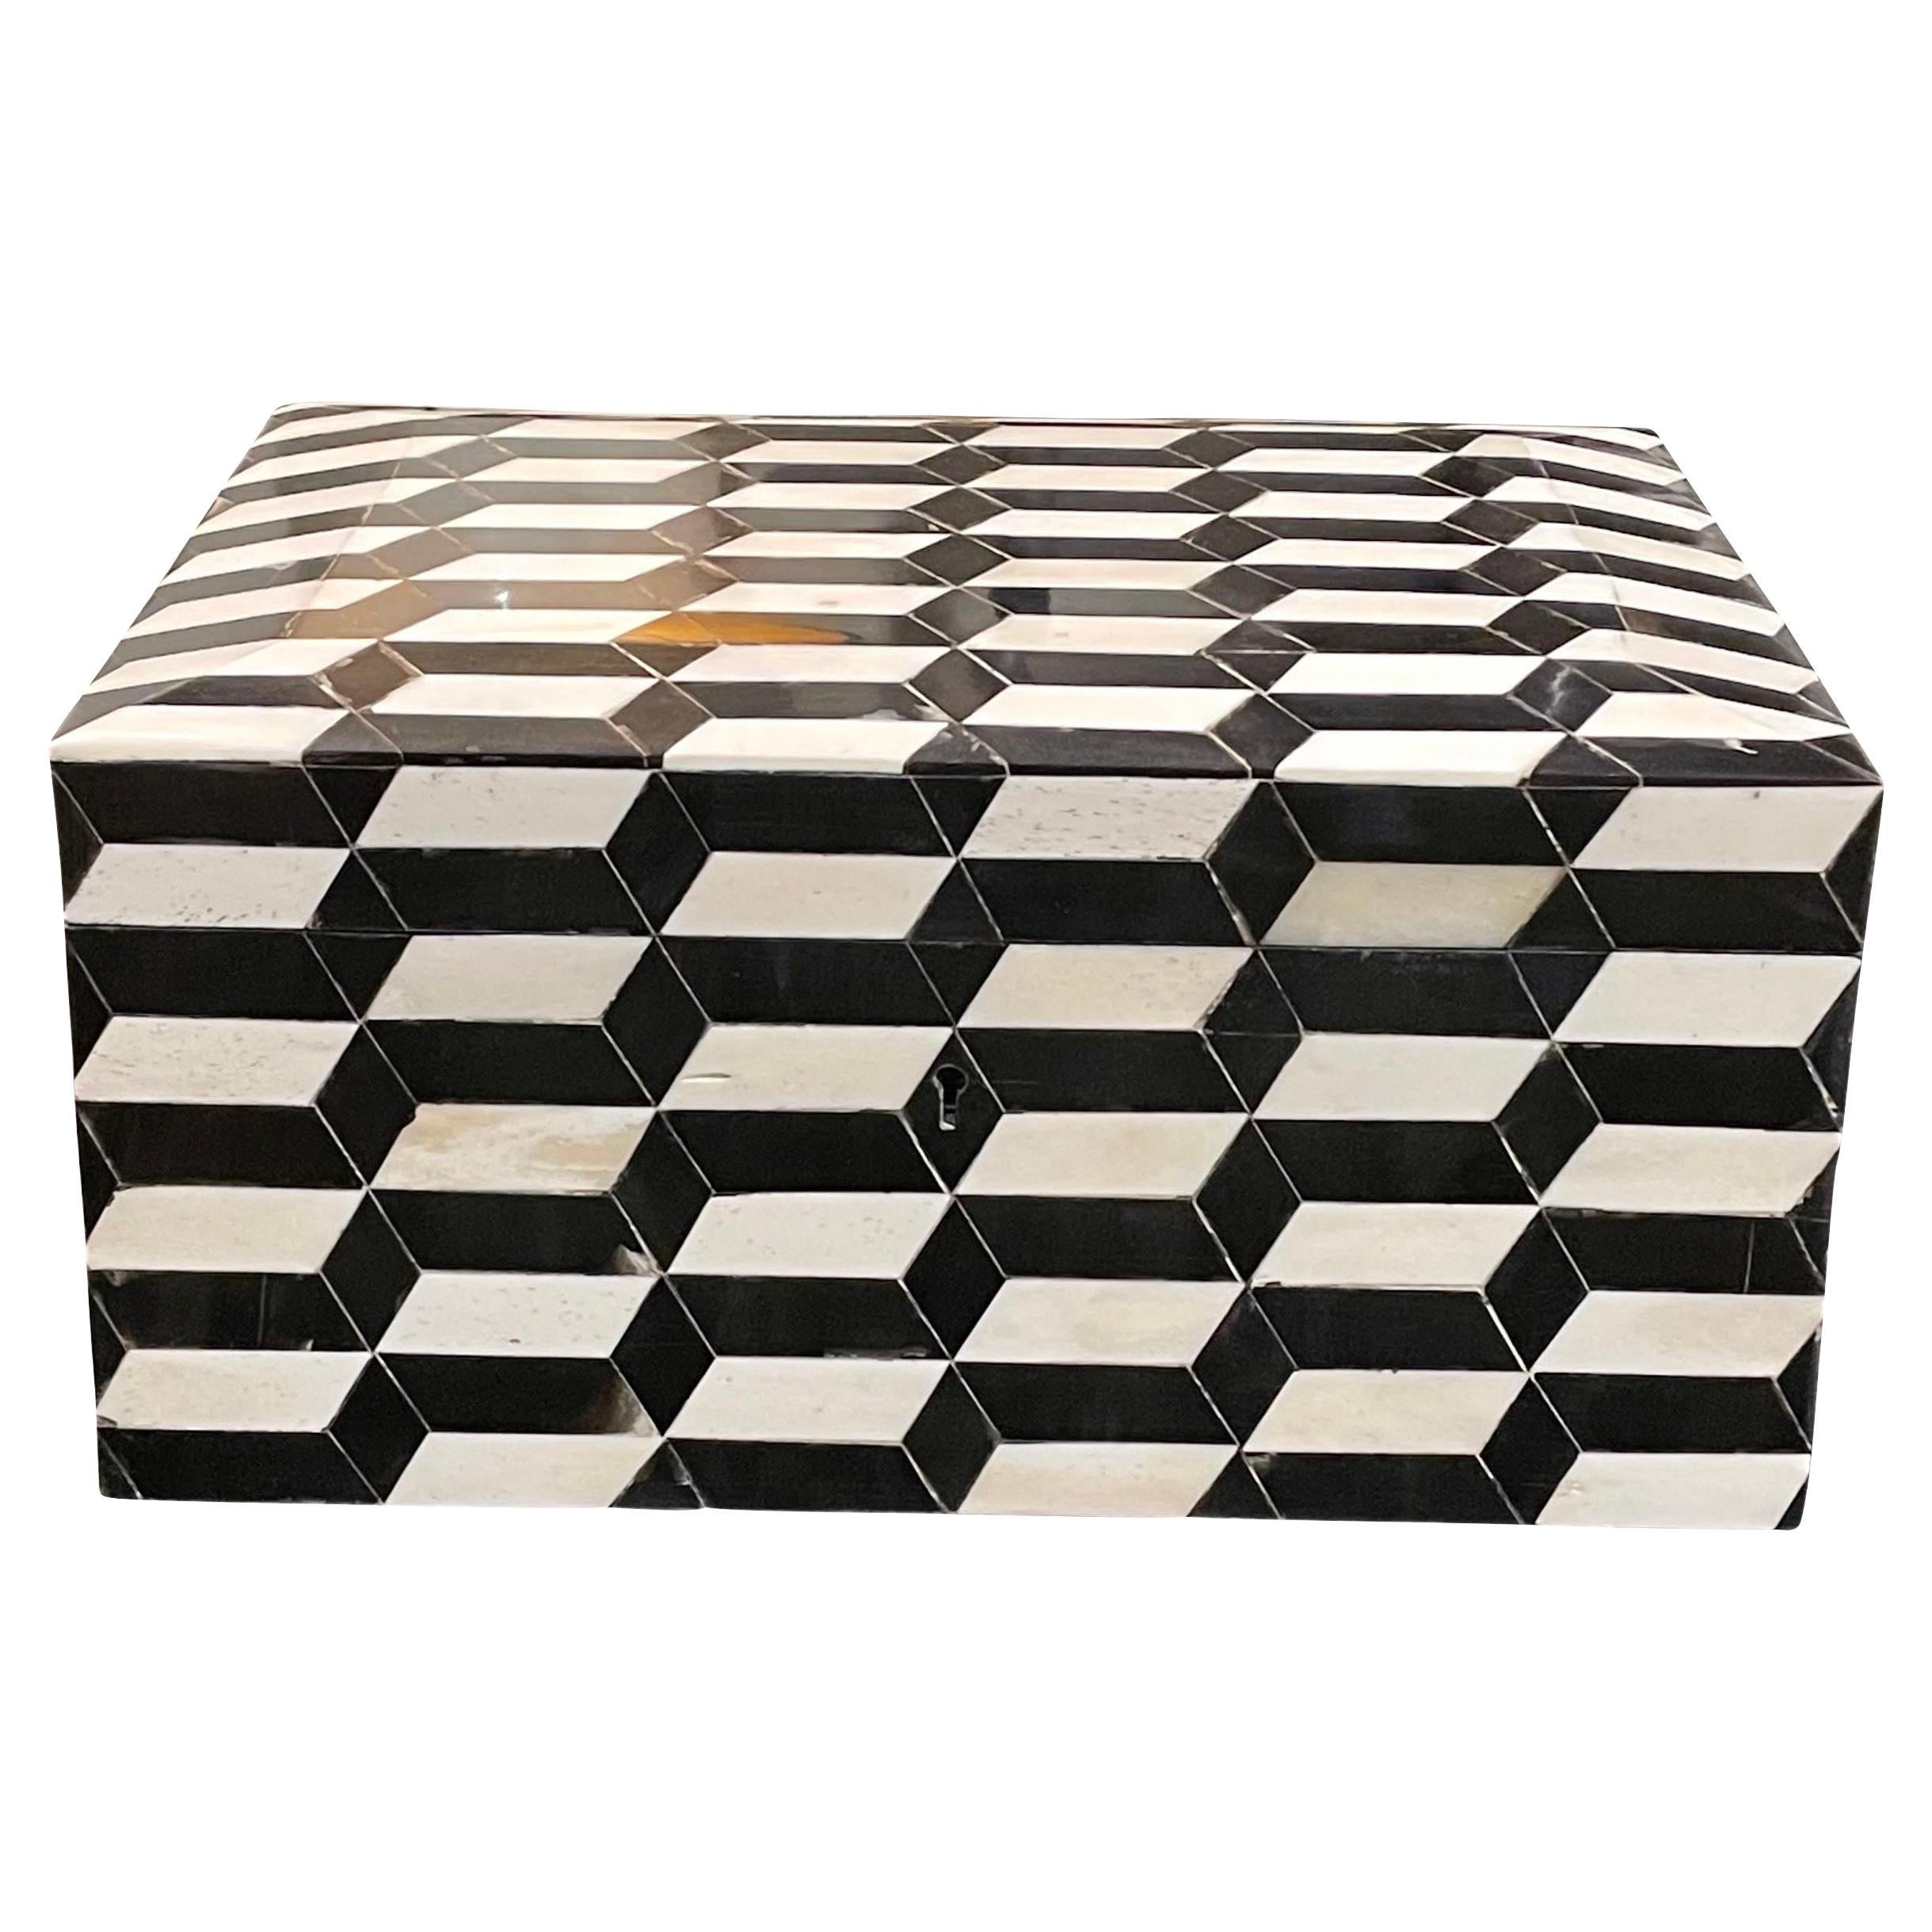 Contemporary India black and white camel bone box.
Tiles placed to create 3D effect.
